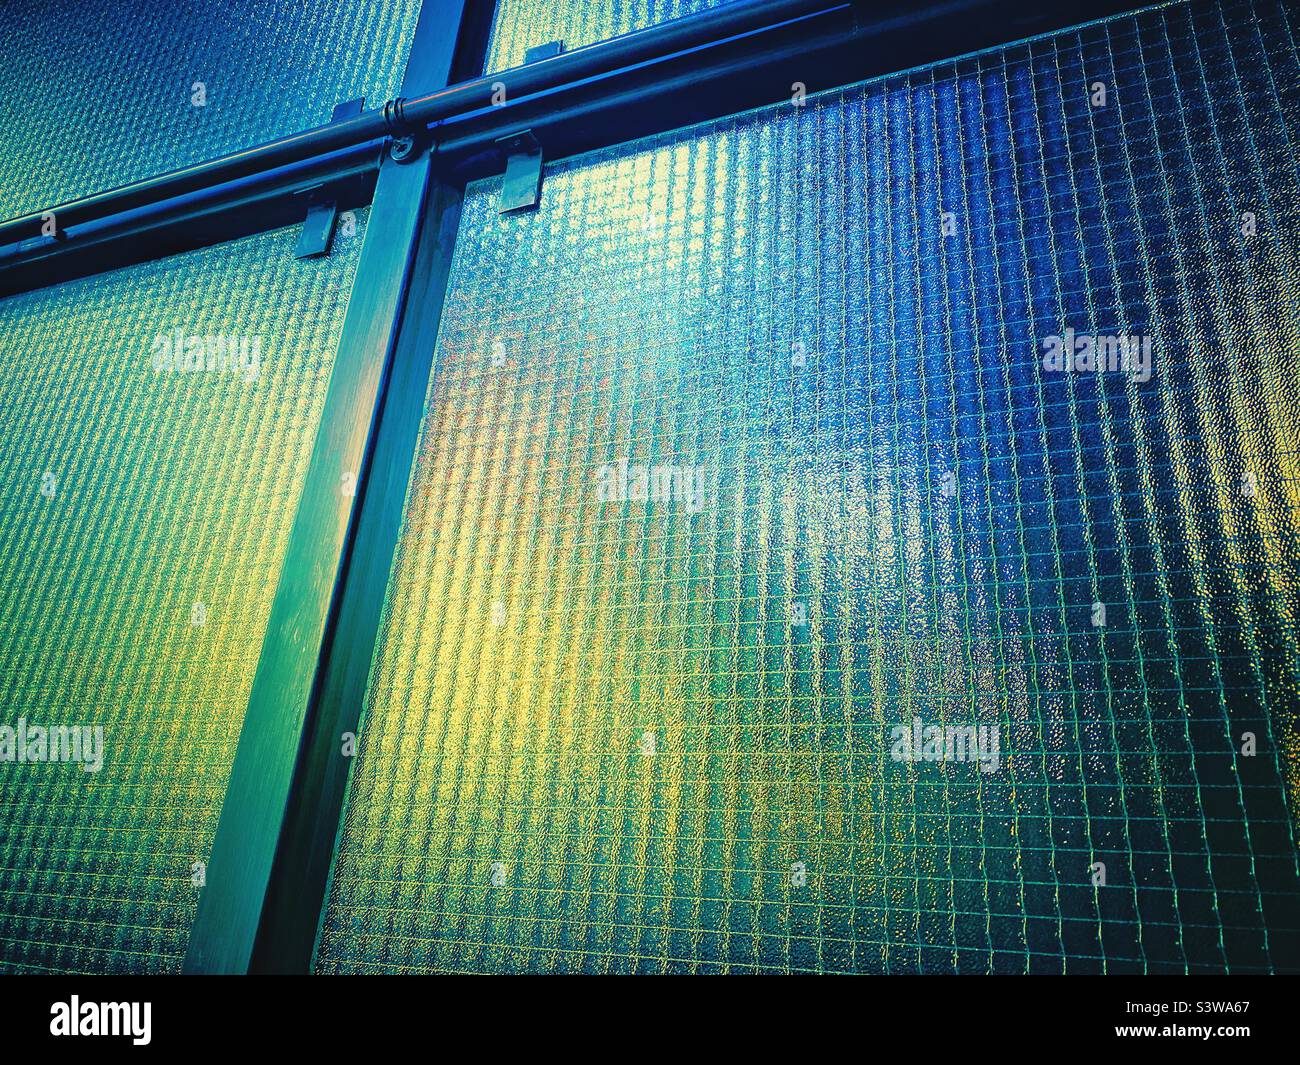 A photograph of industrial interior glass with texture and metal fixings. Blue green light behind. Copy space. Industrial background. Stock Photo